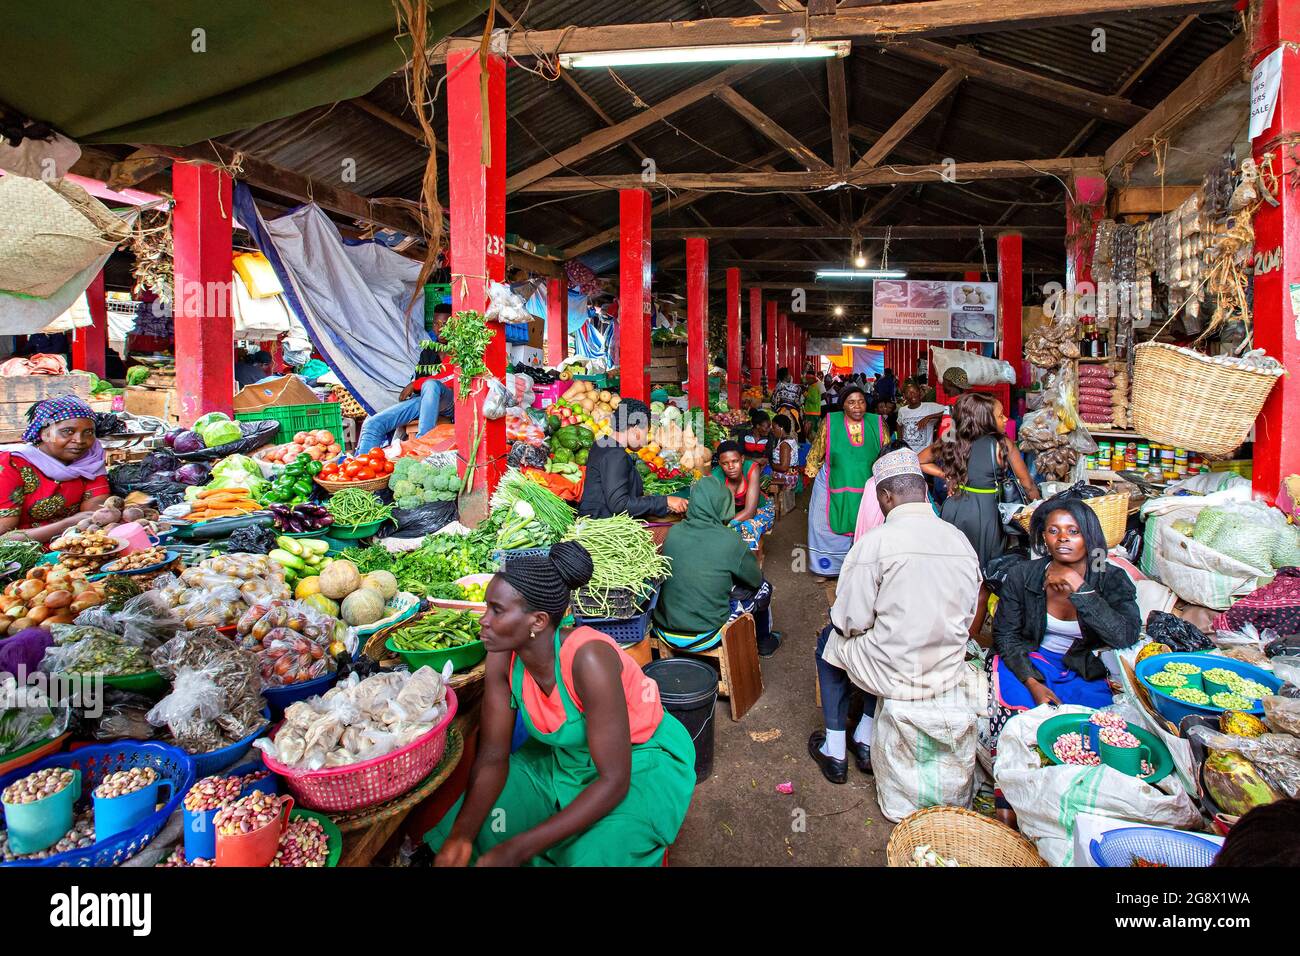 Farmer's market with fresh fruits and vegetables in Kampala, Uganda Stock Photo